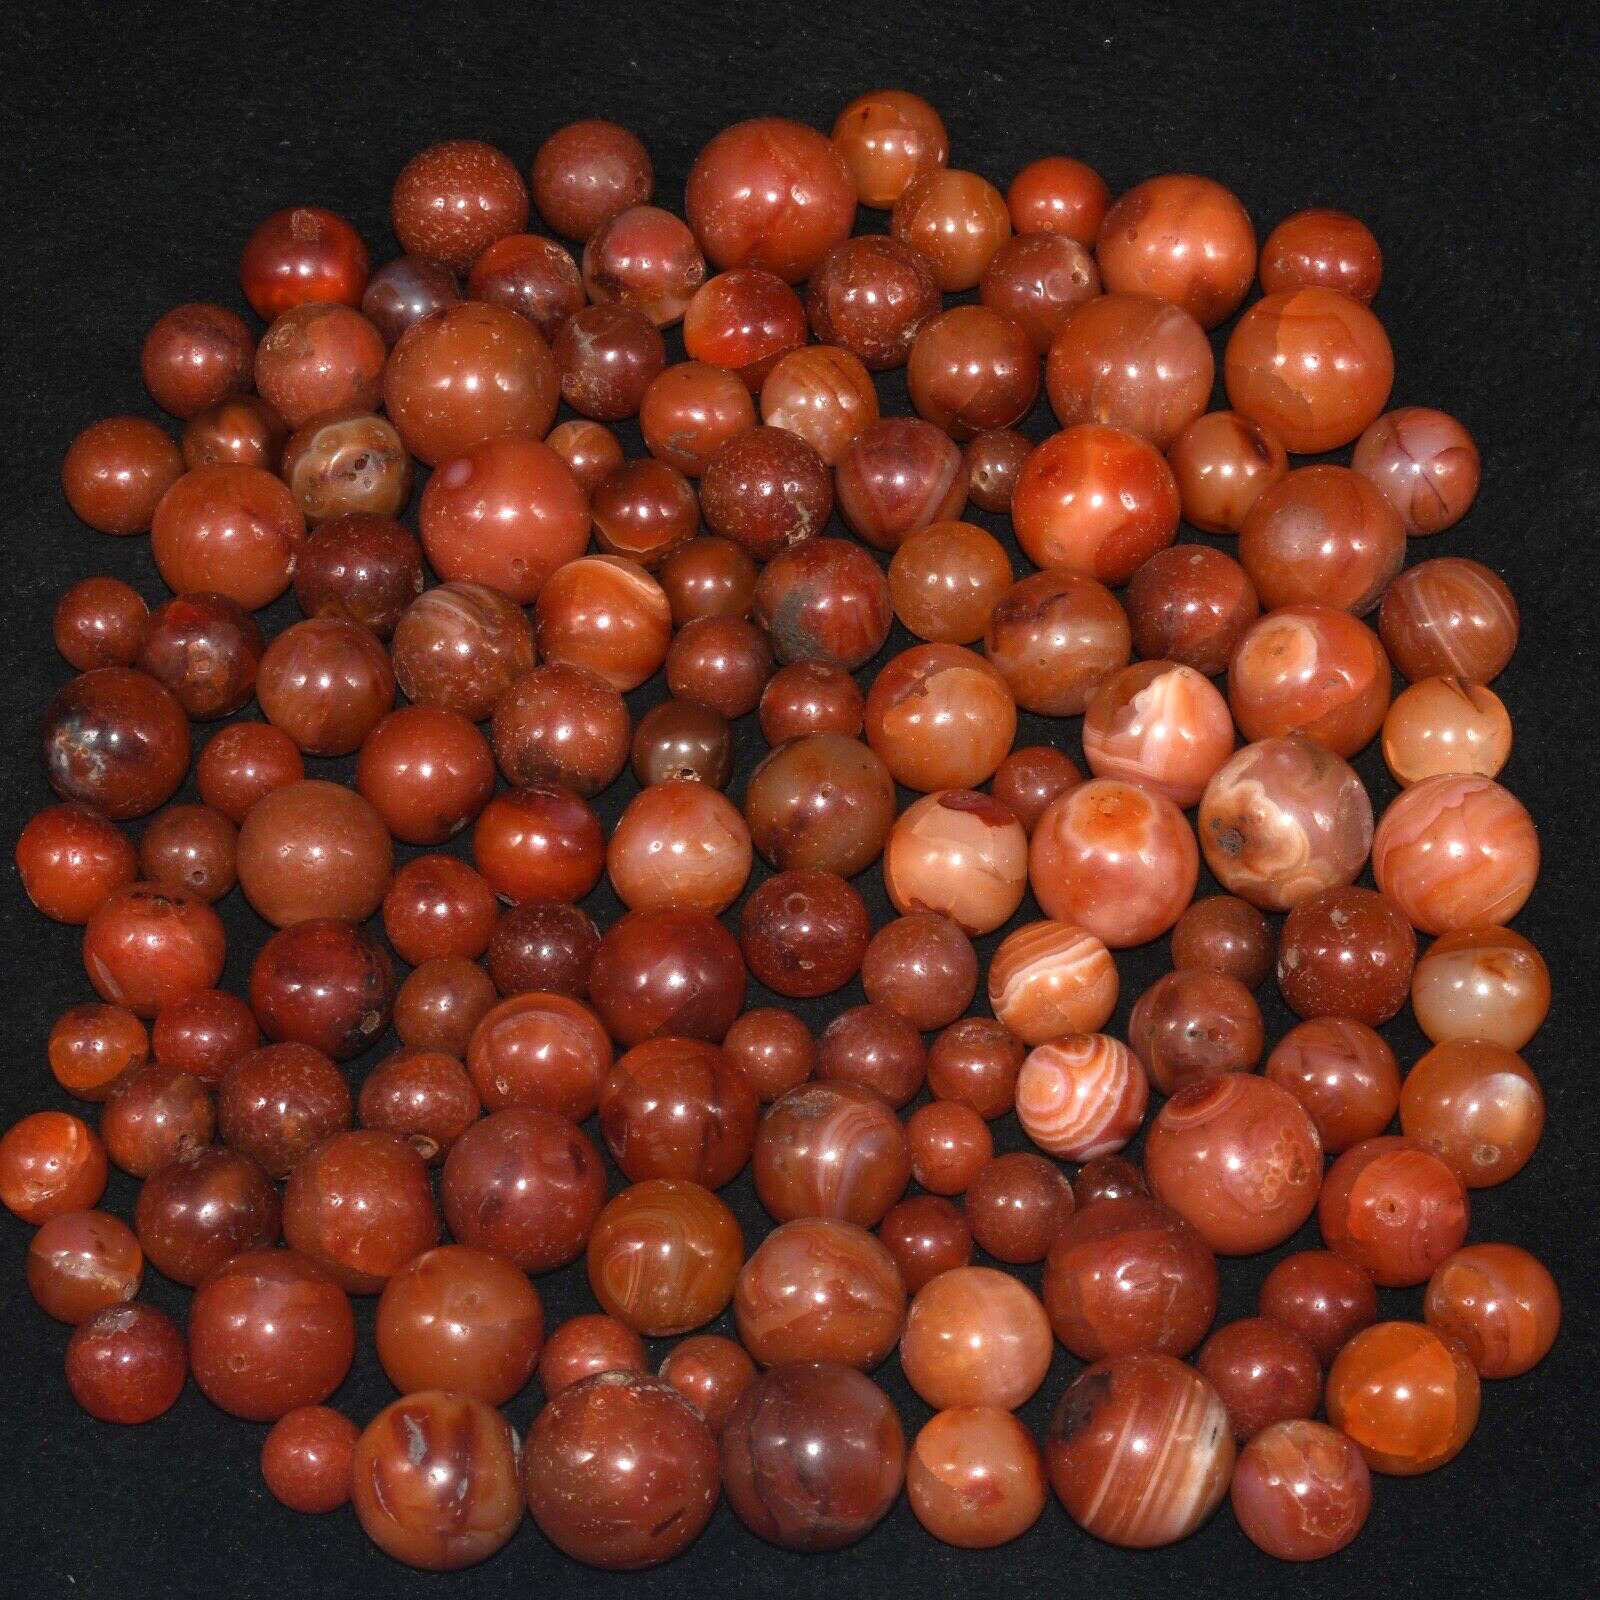 130 Ancient Old Round Banded Carnelian Stone Dzi Beads With Vibrant Color & Eyes